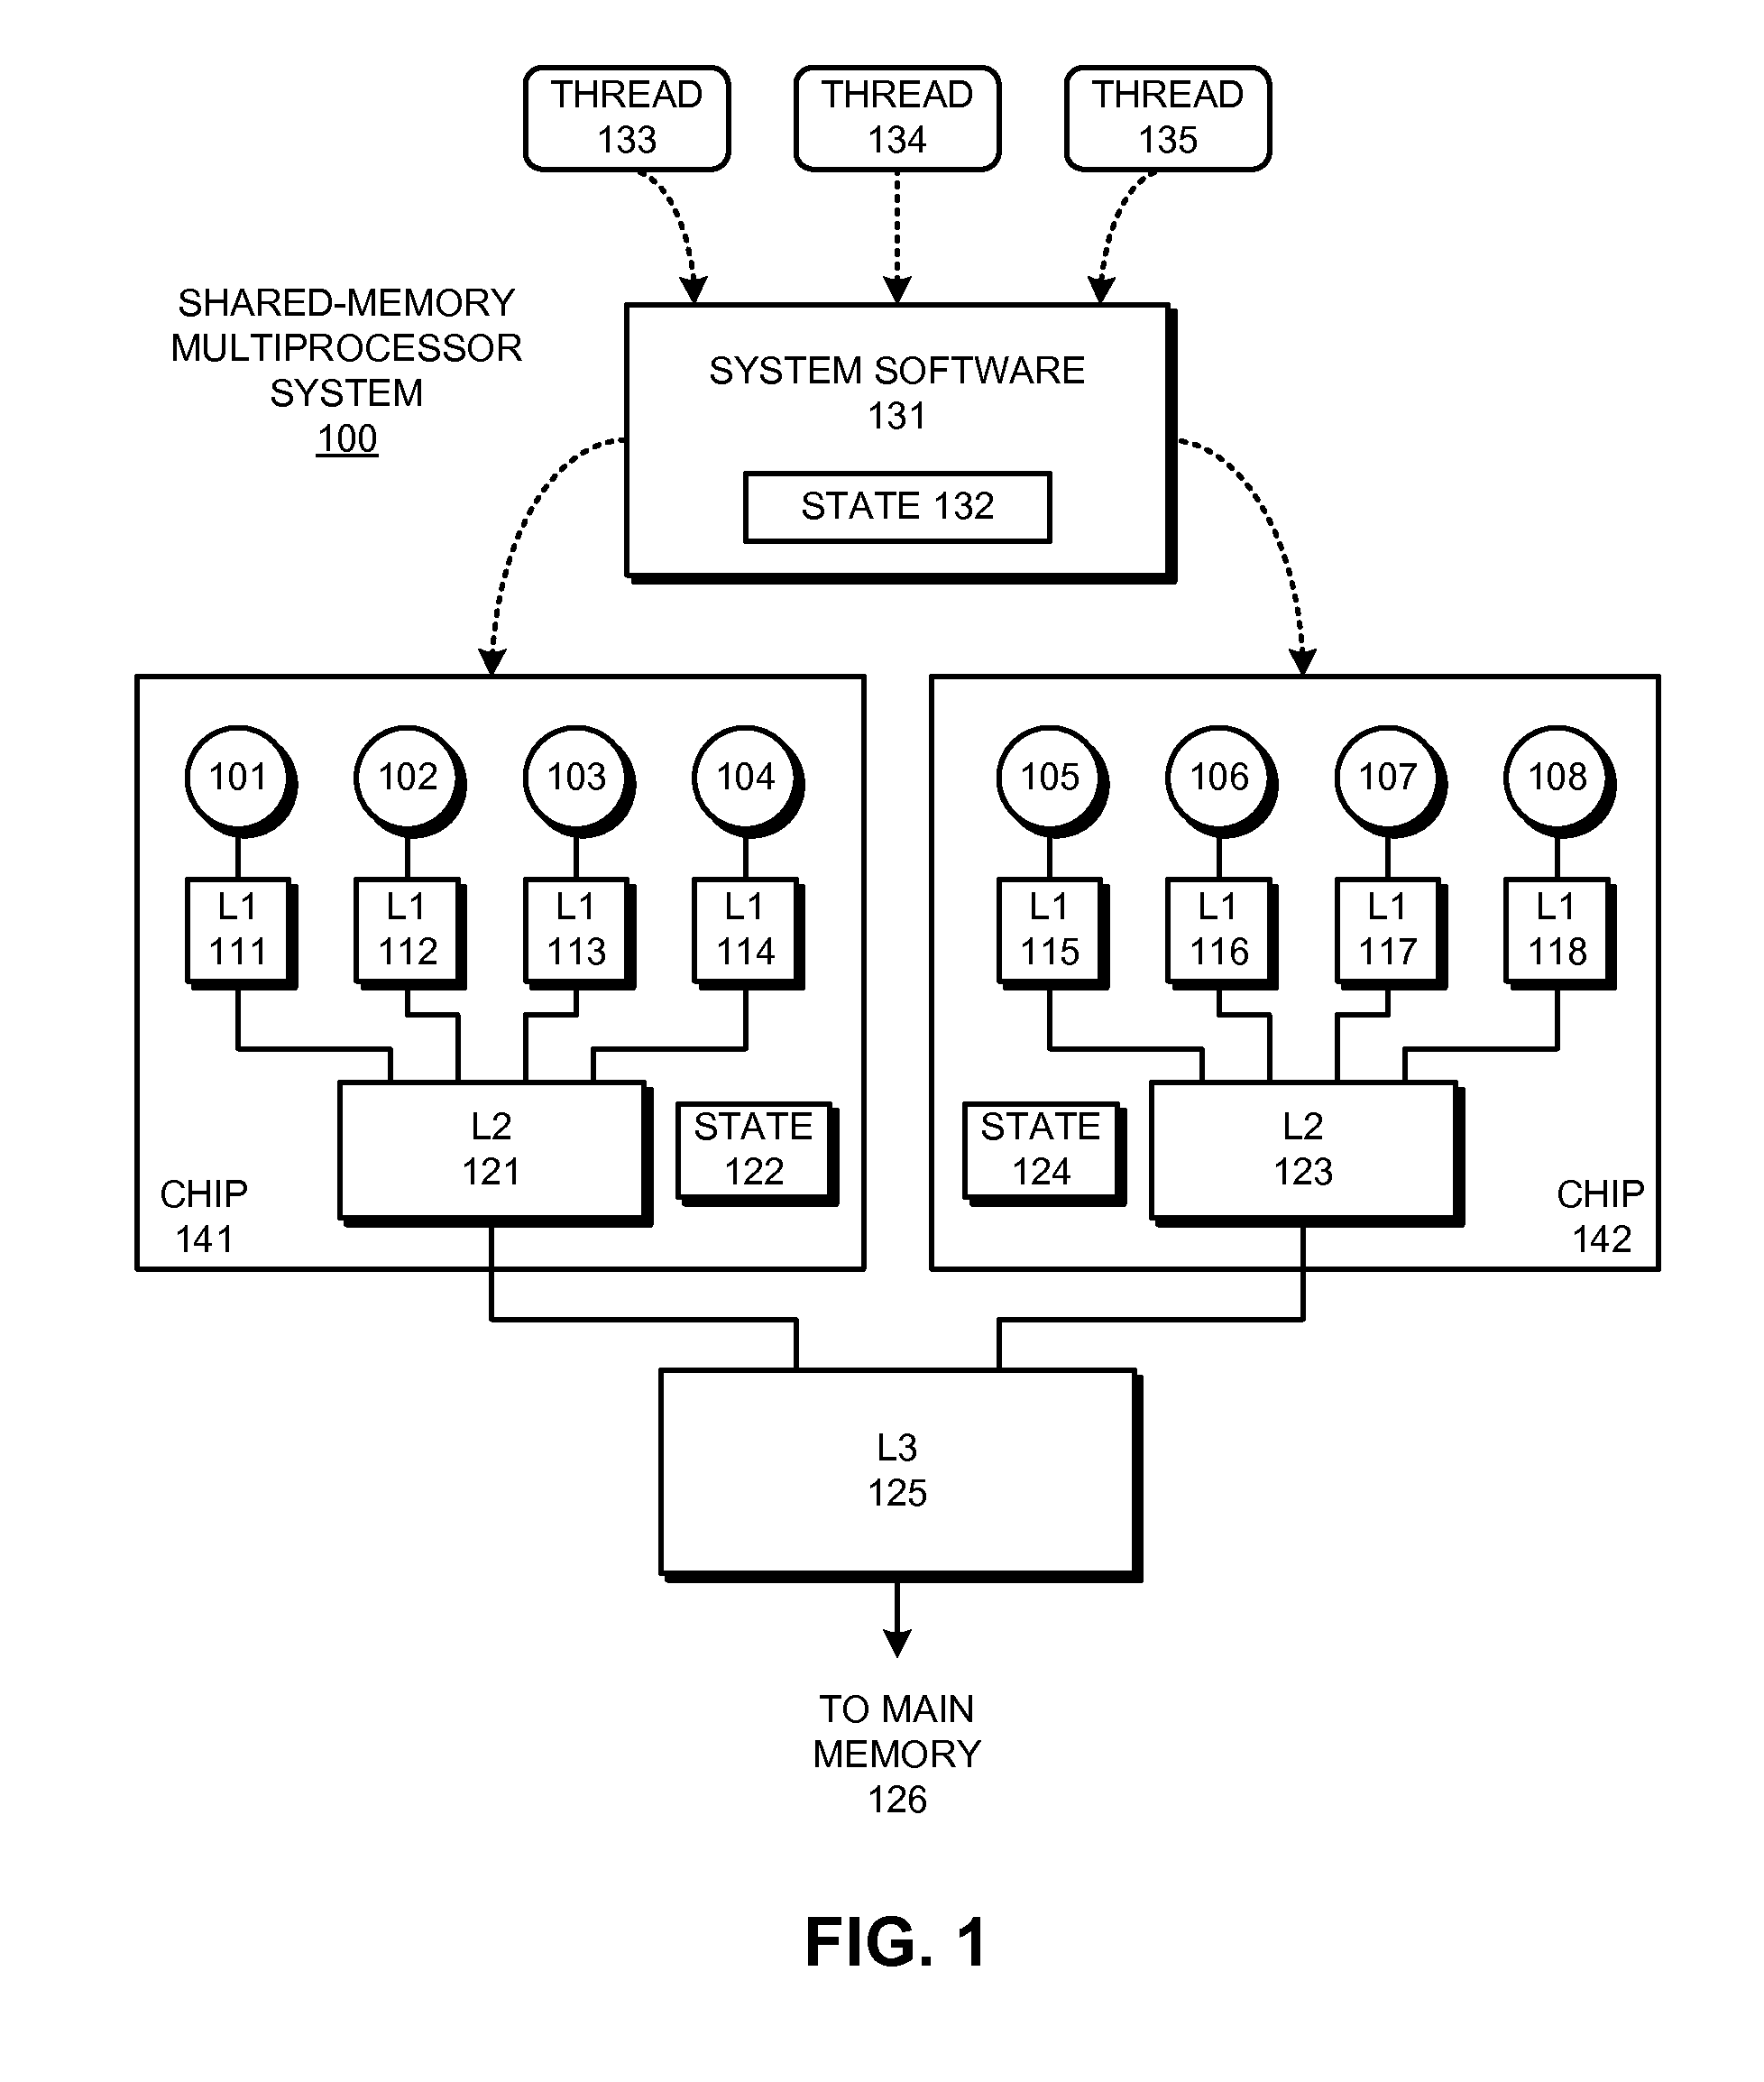 Monitoring multiple memory locations for targeted stores in a shared-memory multiprocessor